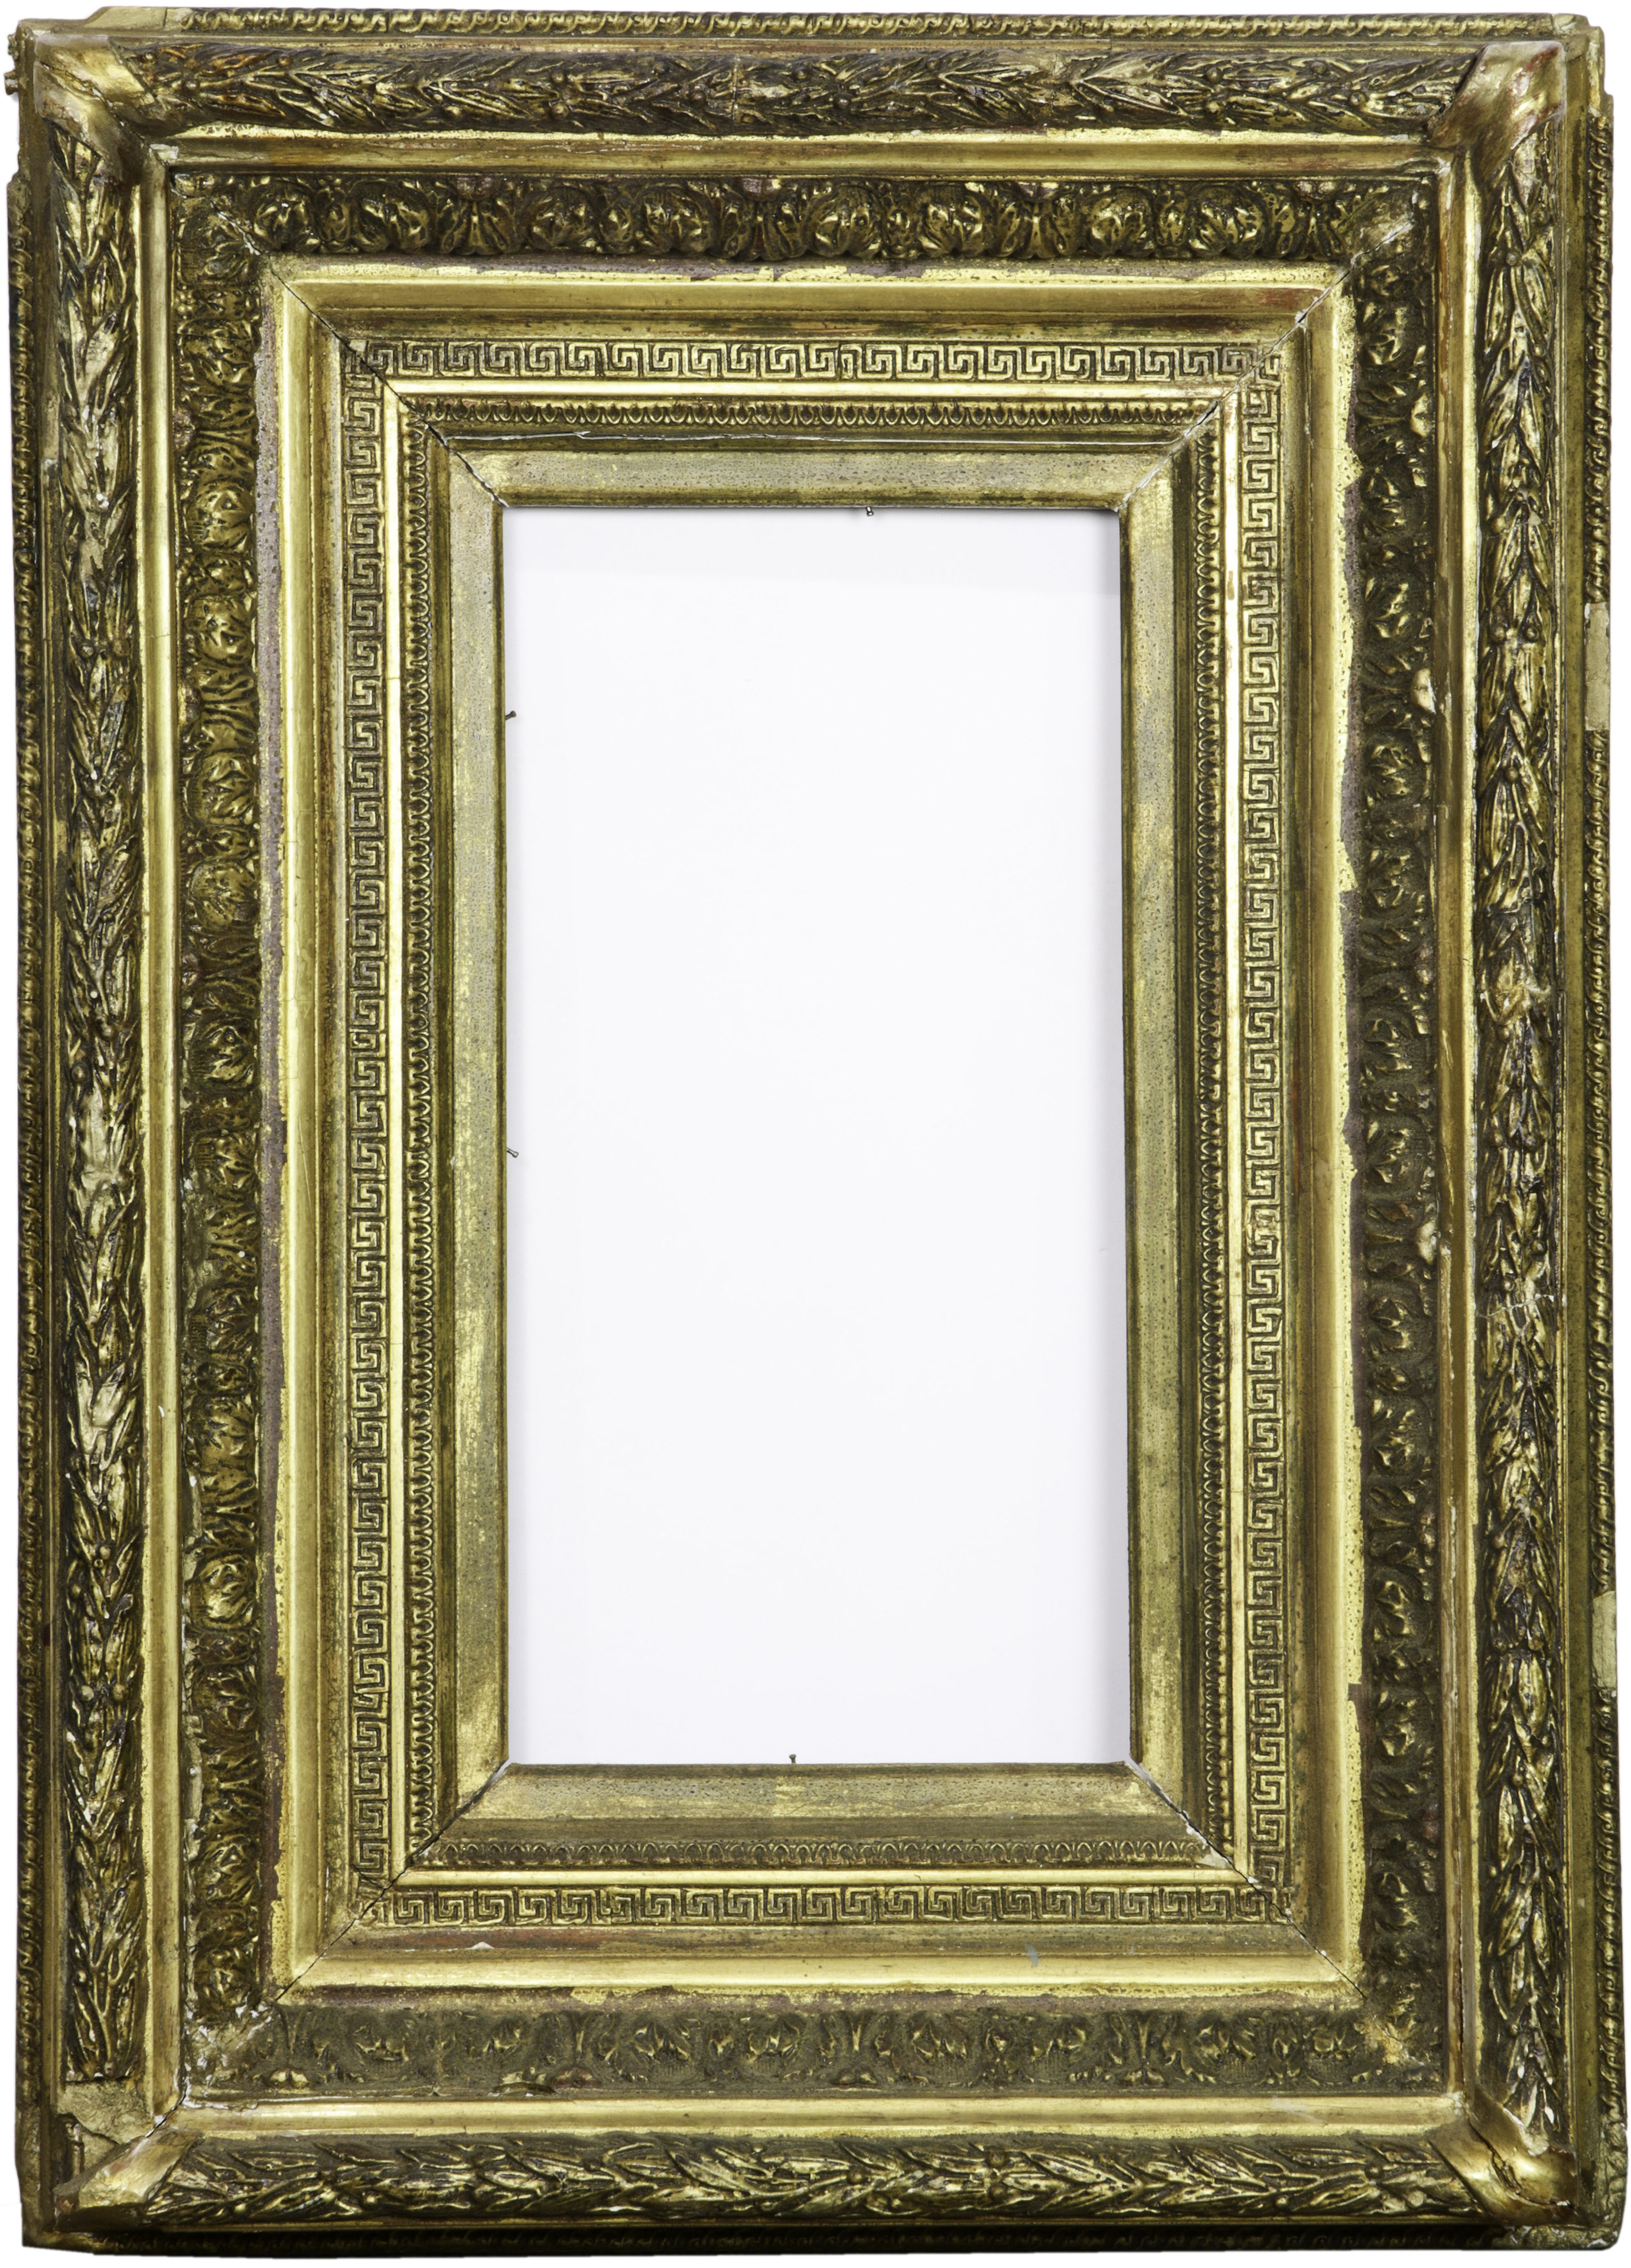 MID 19TH CENTURY FRAME Mid 19th 3a68f1